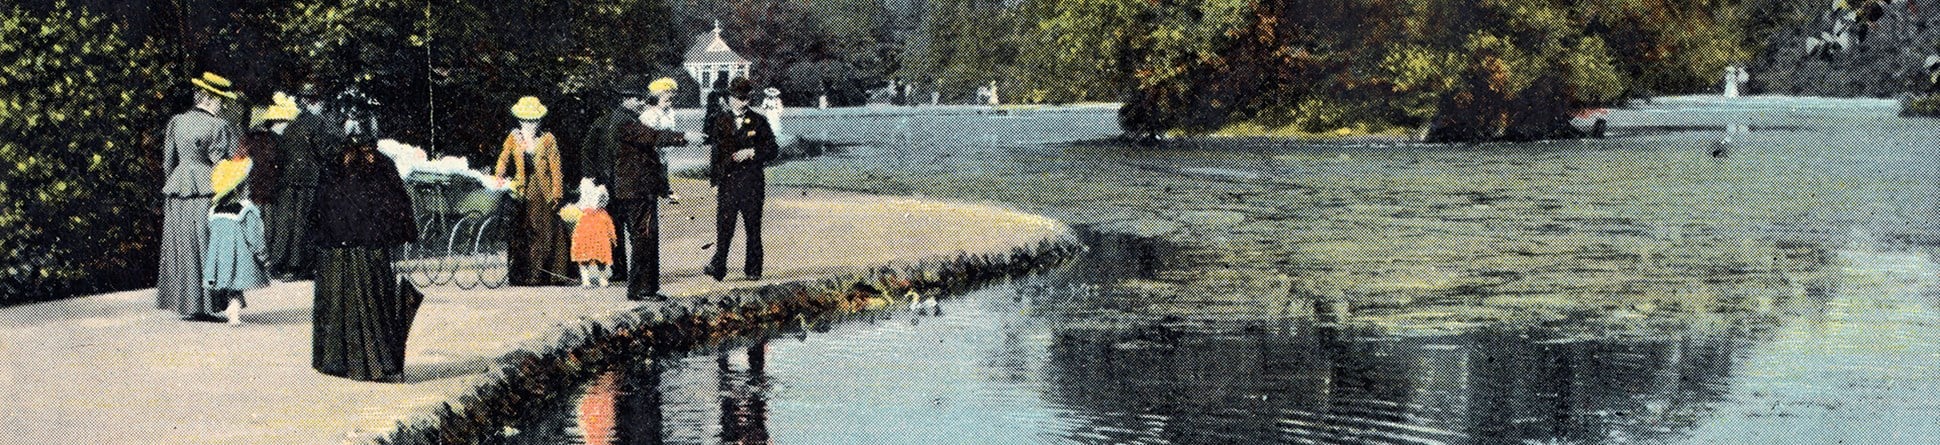 The Lake, Middlesbrough, North Yorkshire - a historic postcard